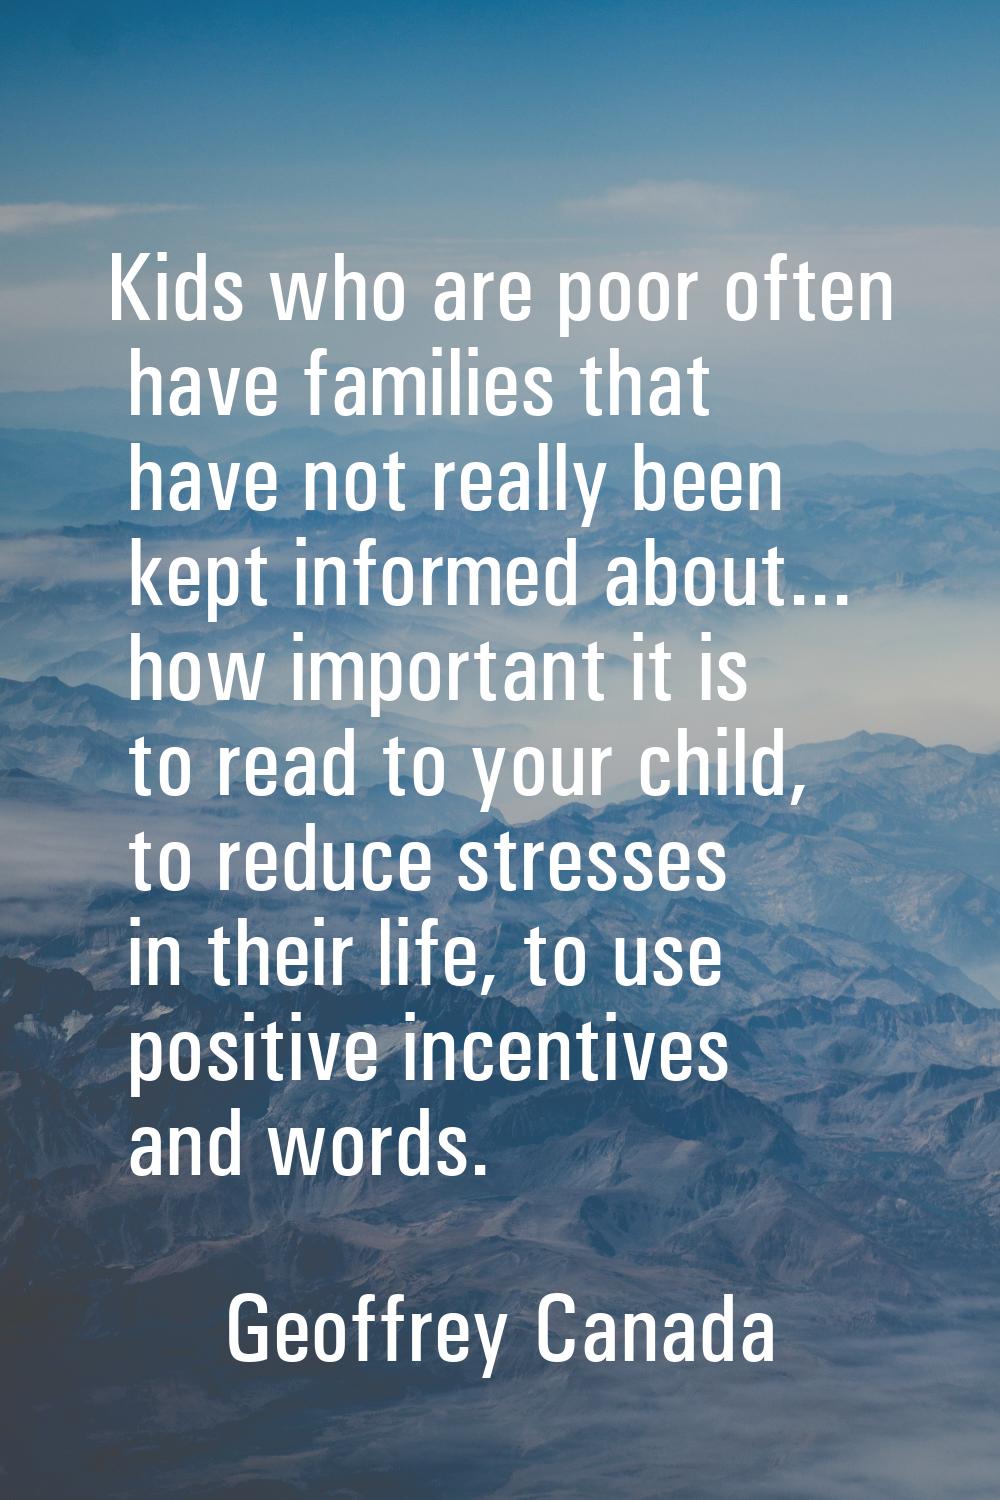 Kids who are poor often have families that have not really been kept informed about... how importan